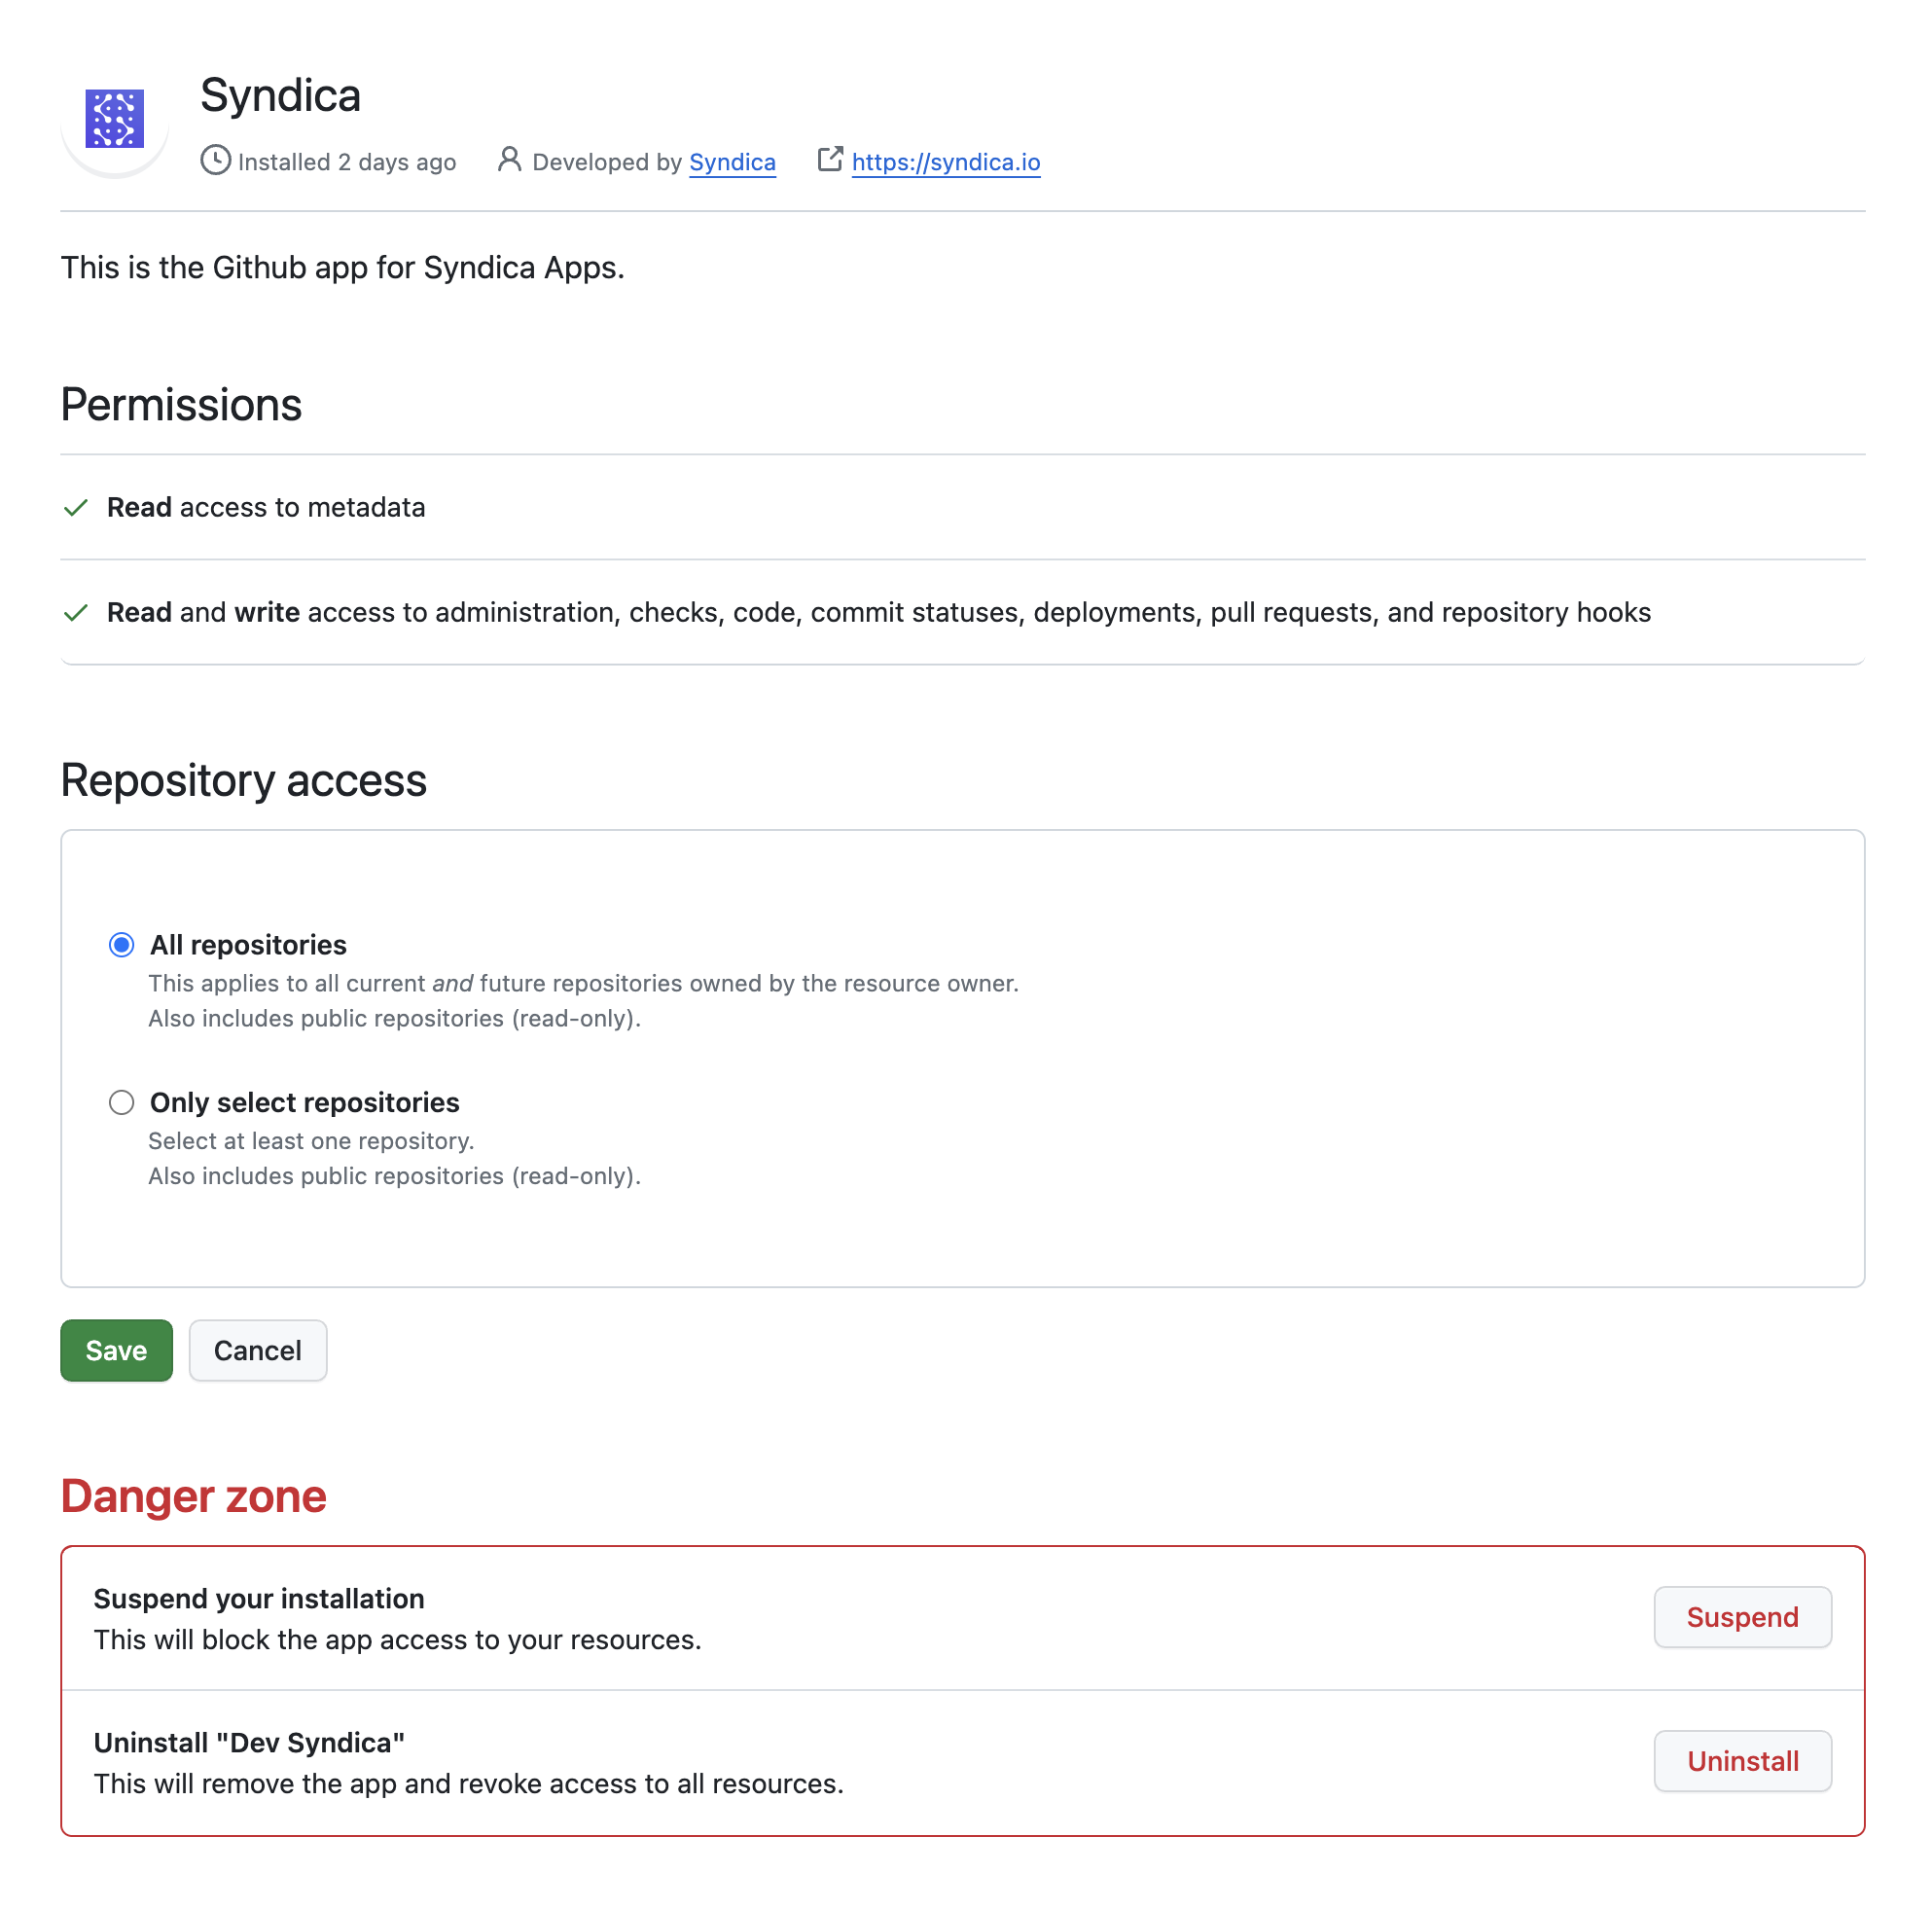 The application settings page in GitHub for the Syndica app